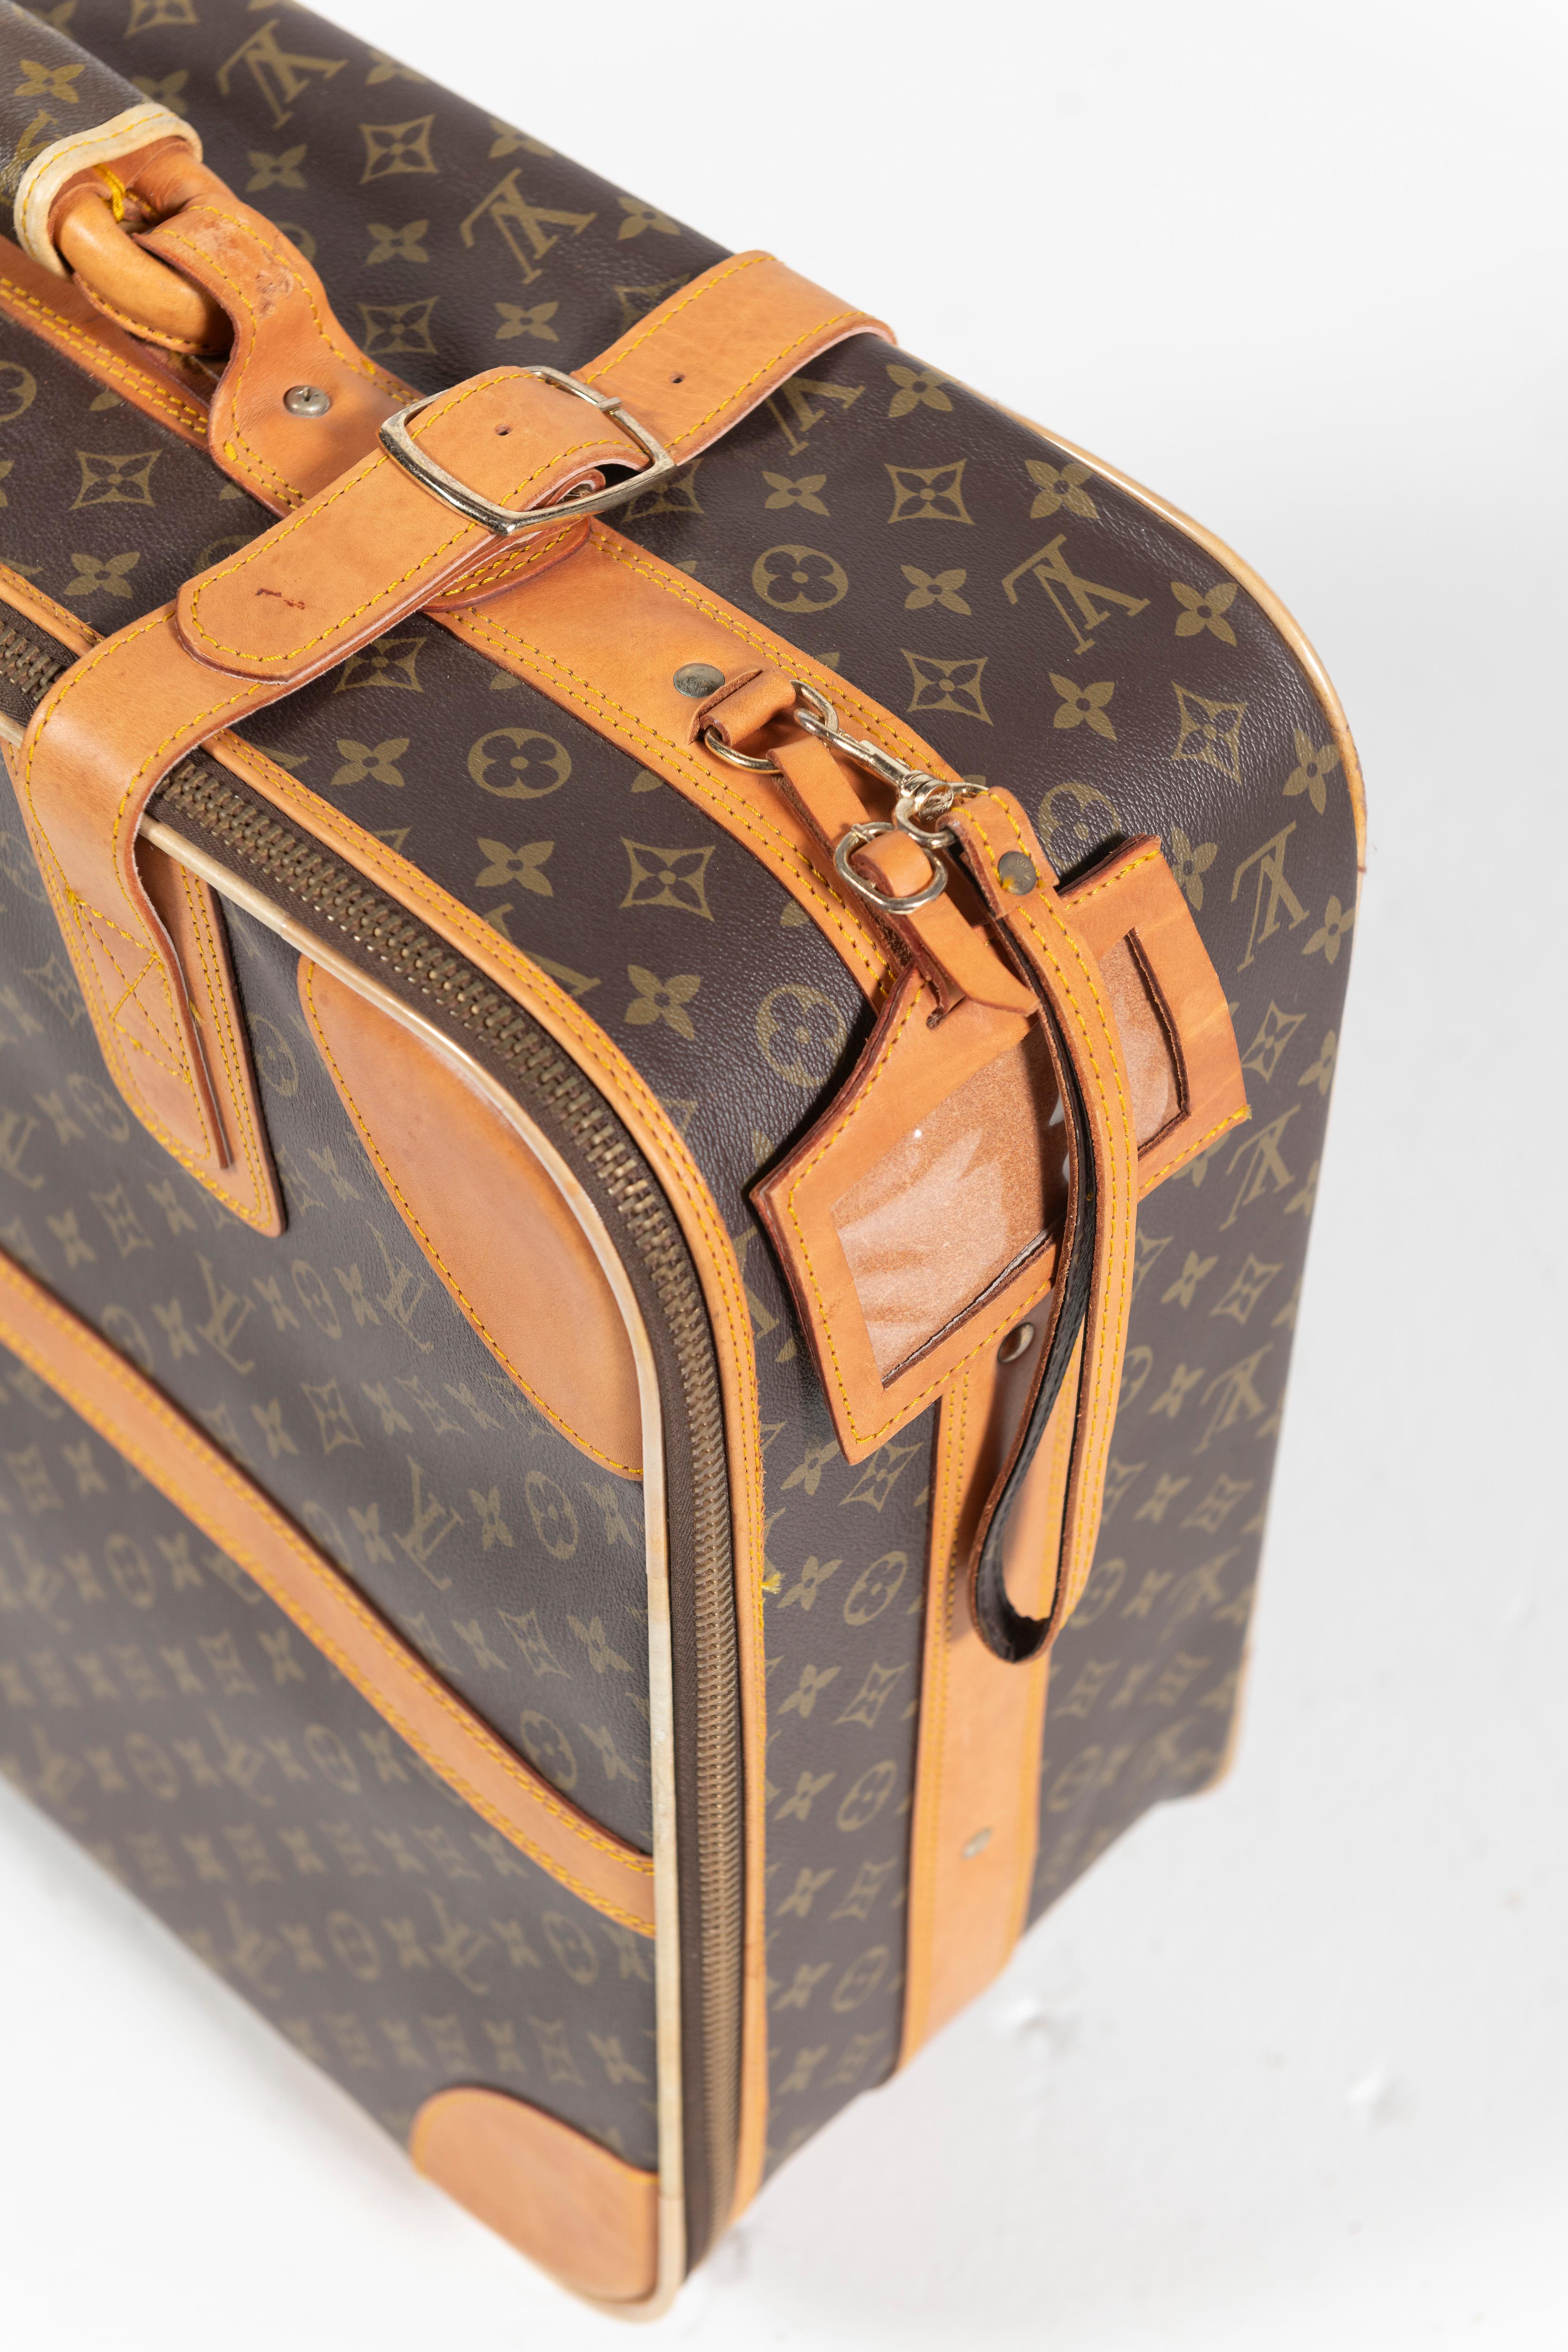 Vintage Louis Vuitton Suitcase, Monogrammed Coated Canvas, Small-Sized For Sale 3